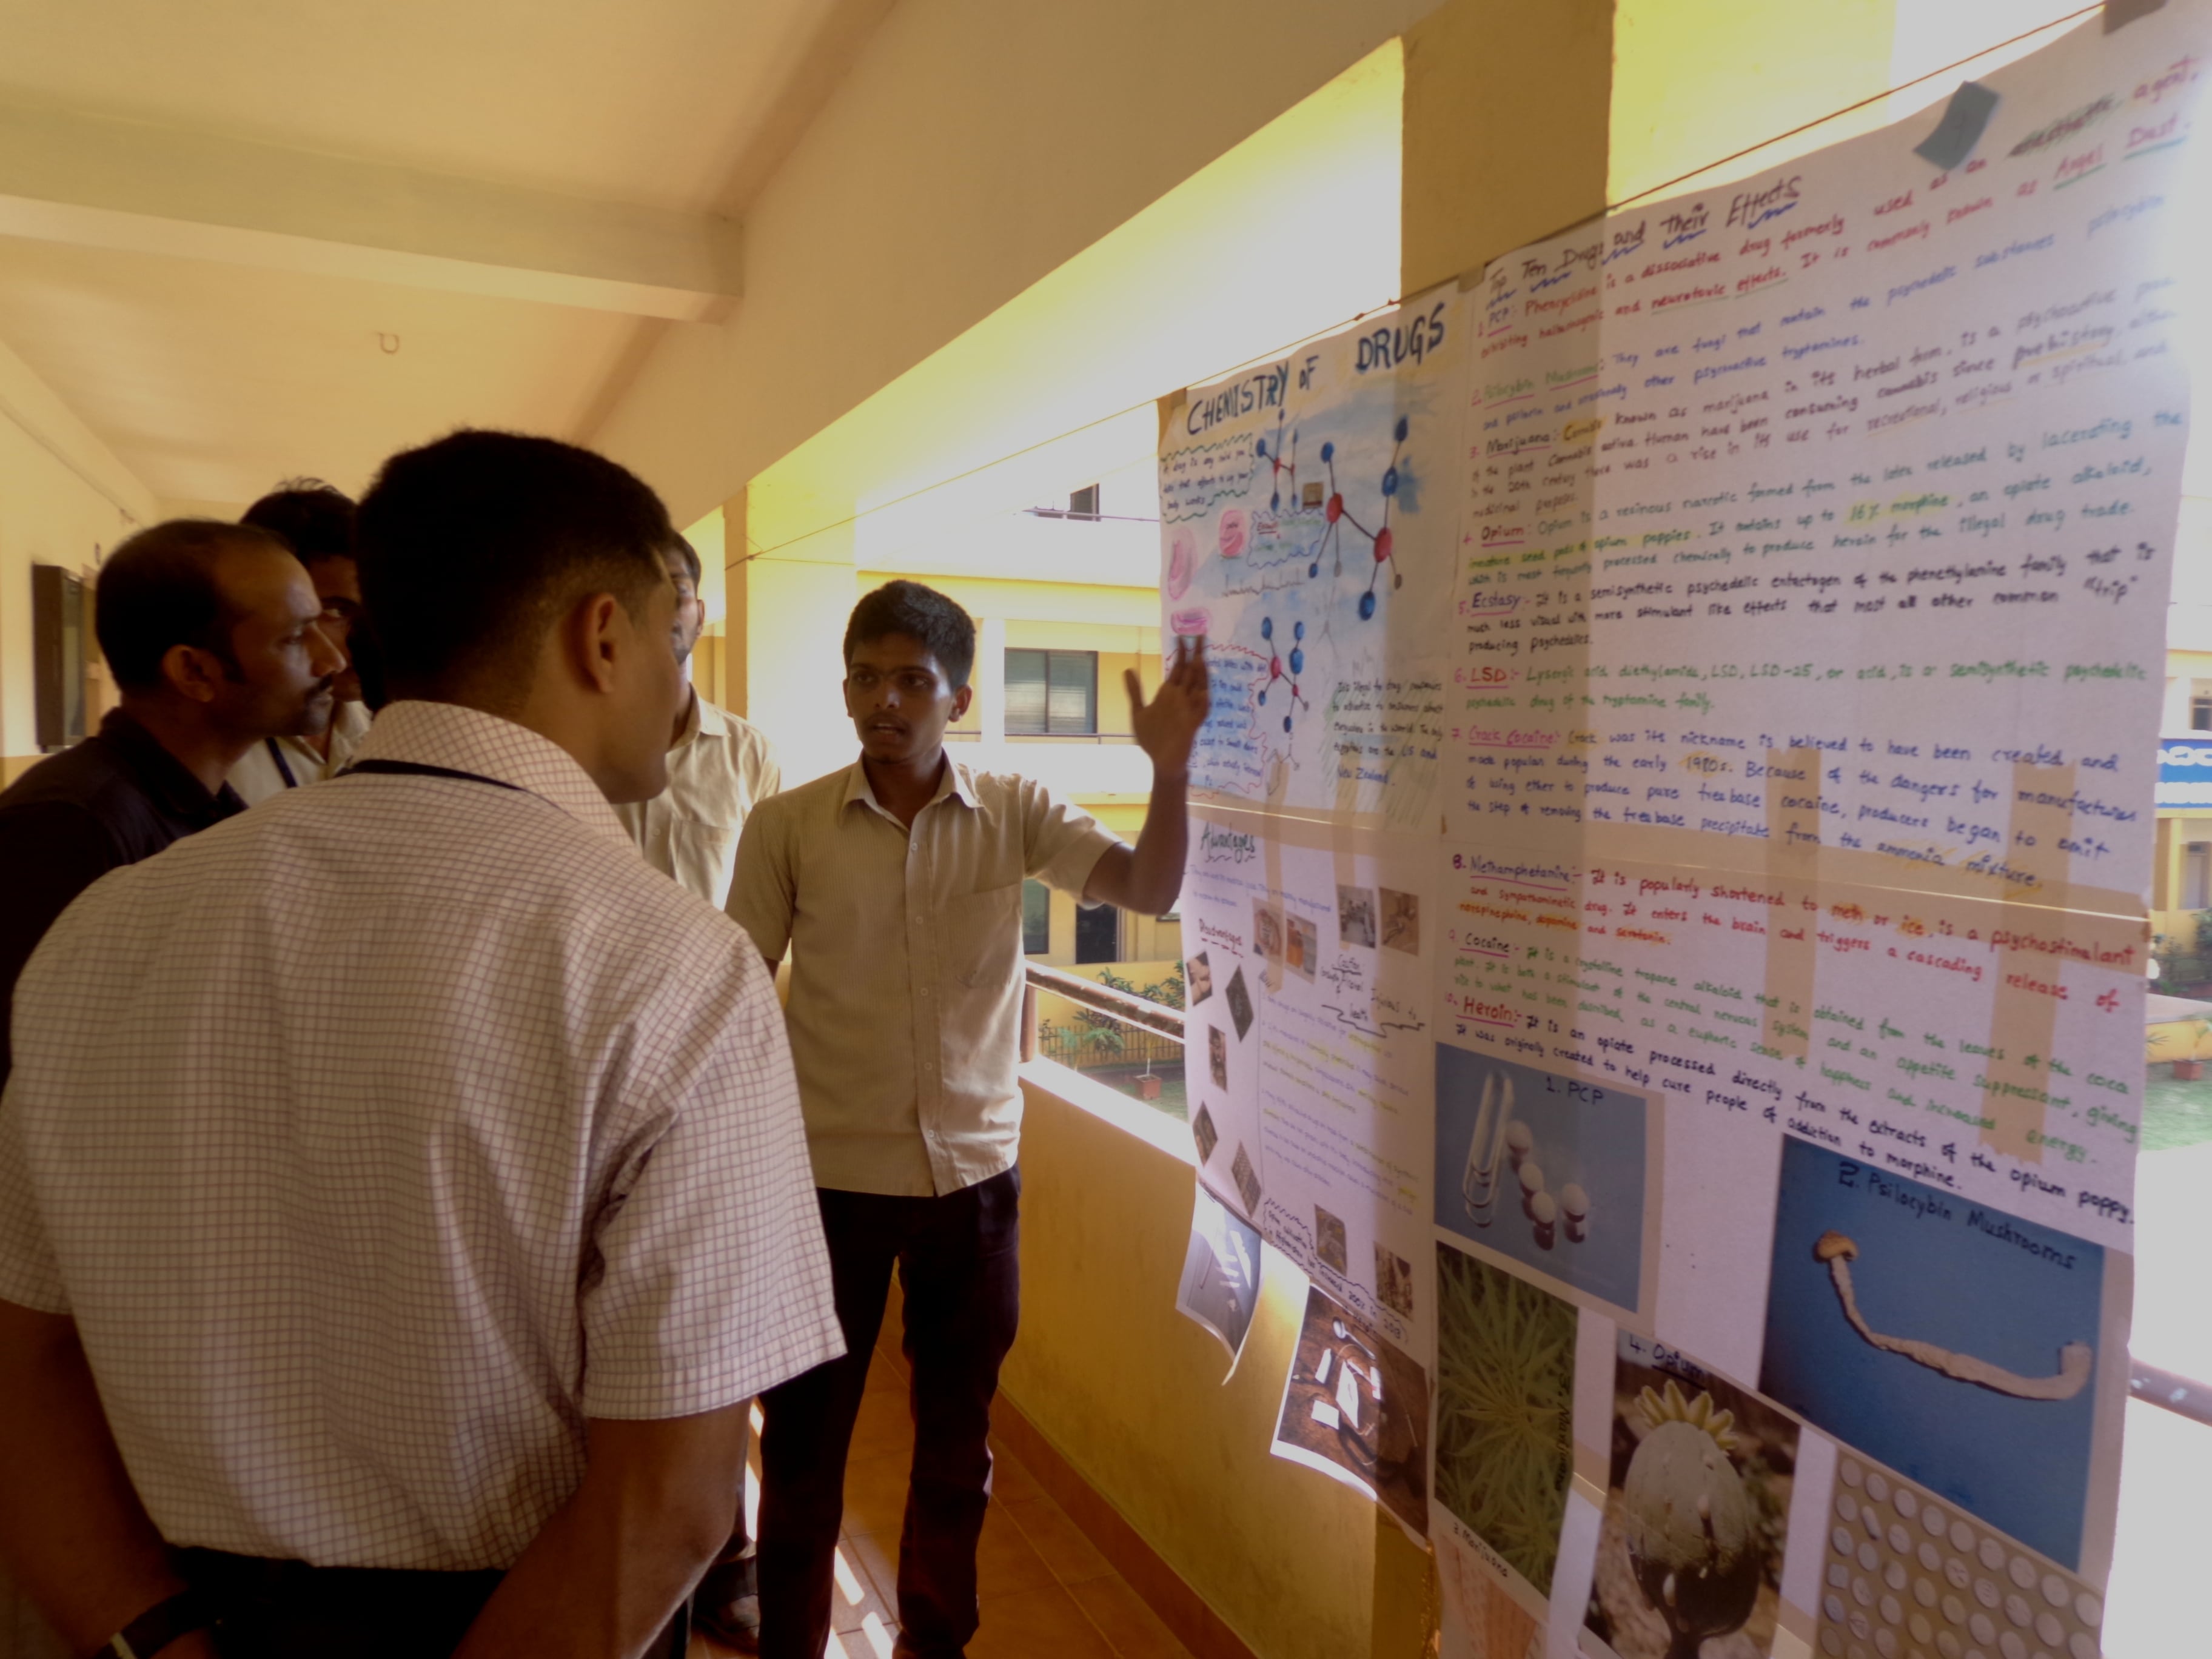 A poster presentation competition held on 02/02/2015